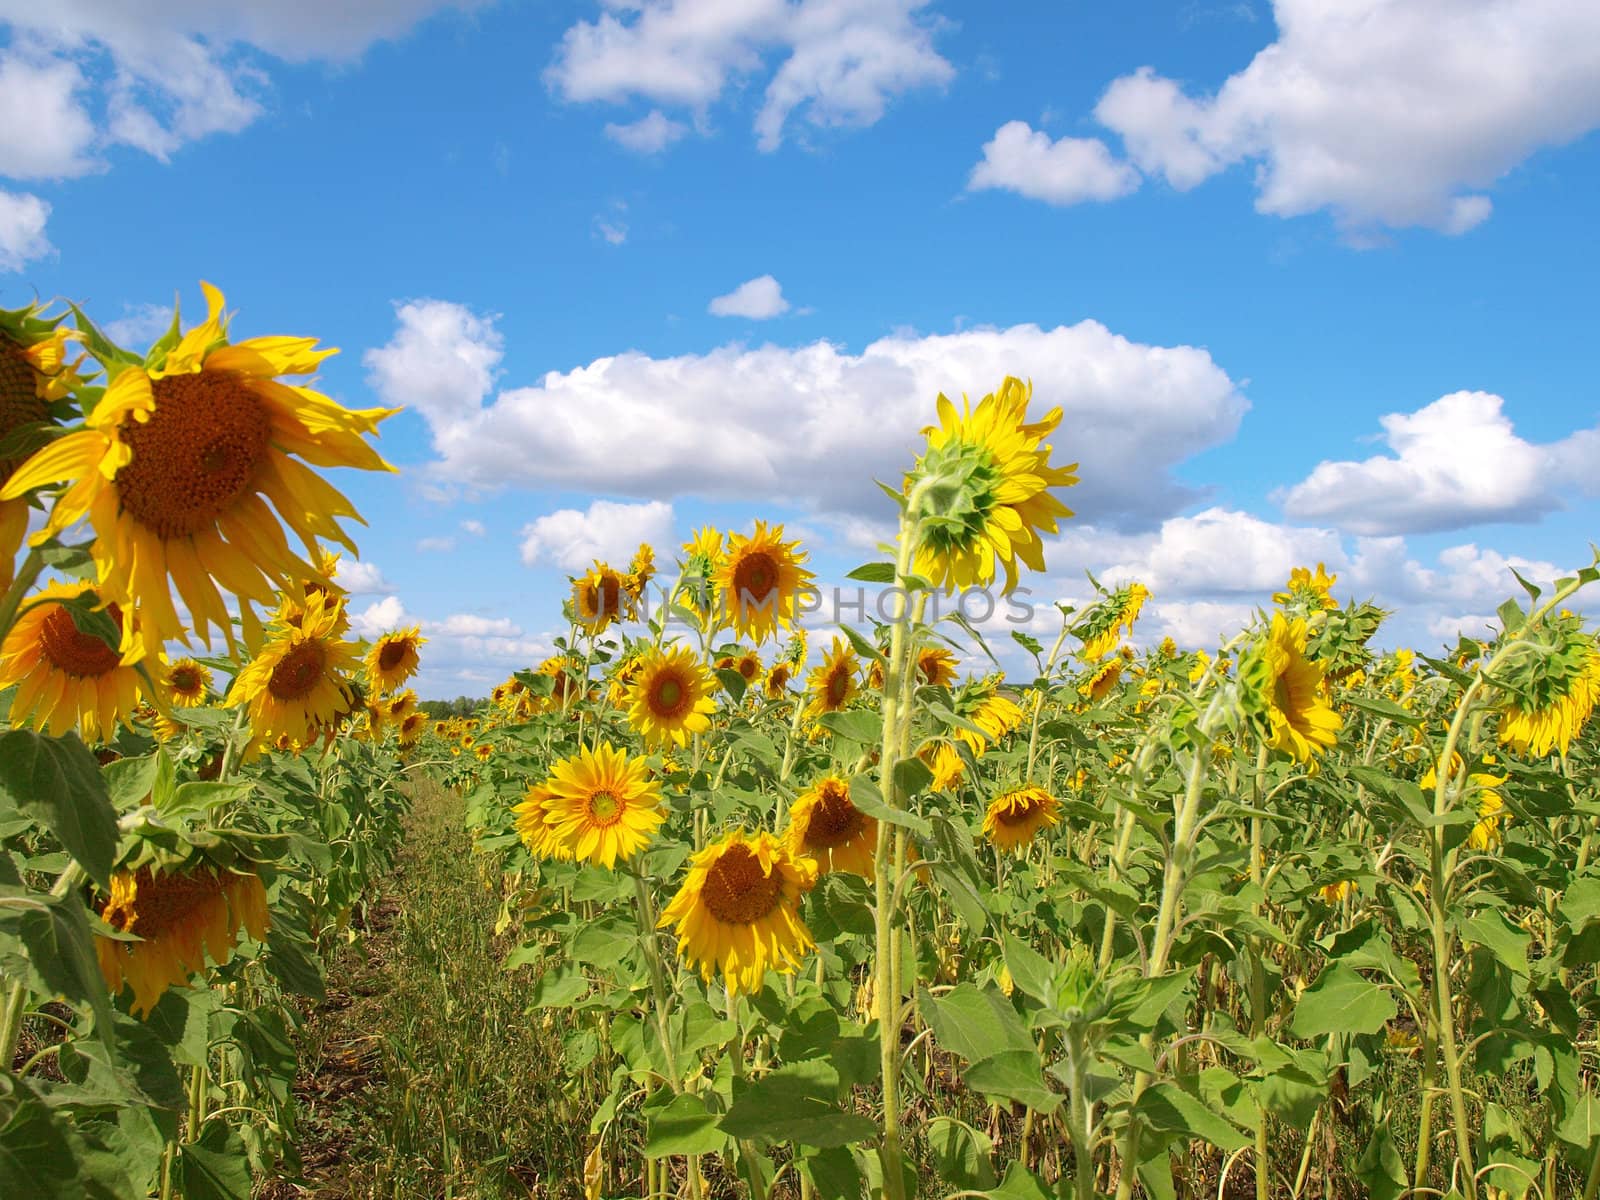 Sunflower's field with blue sky